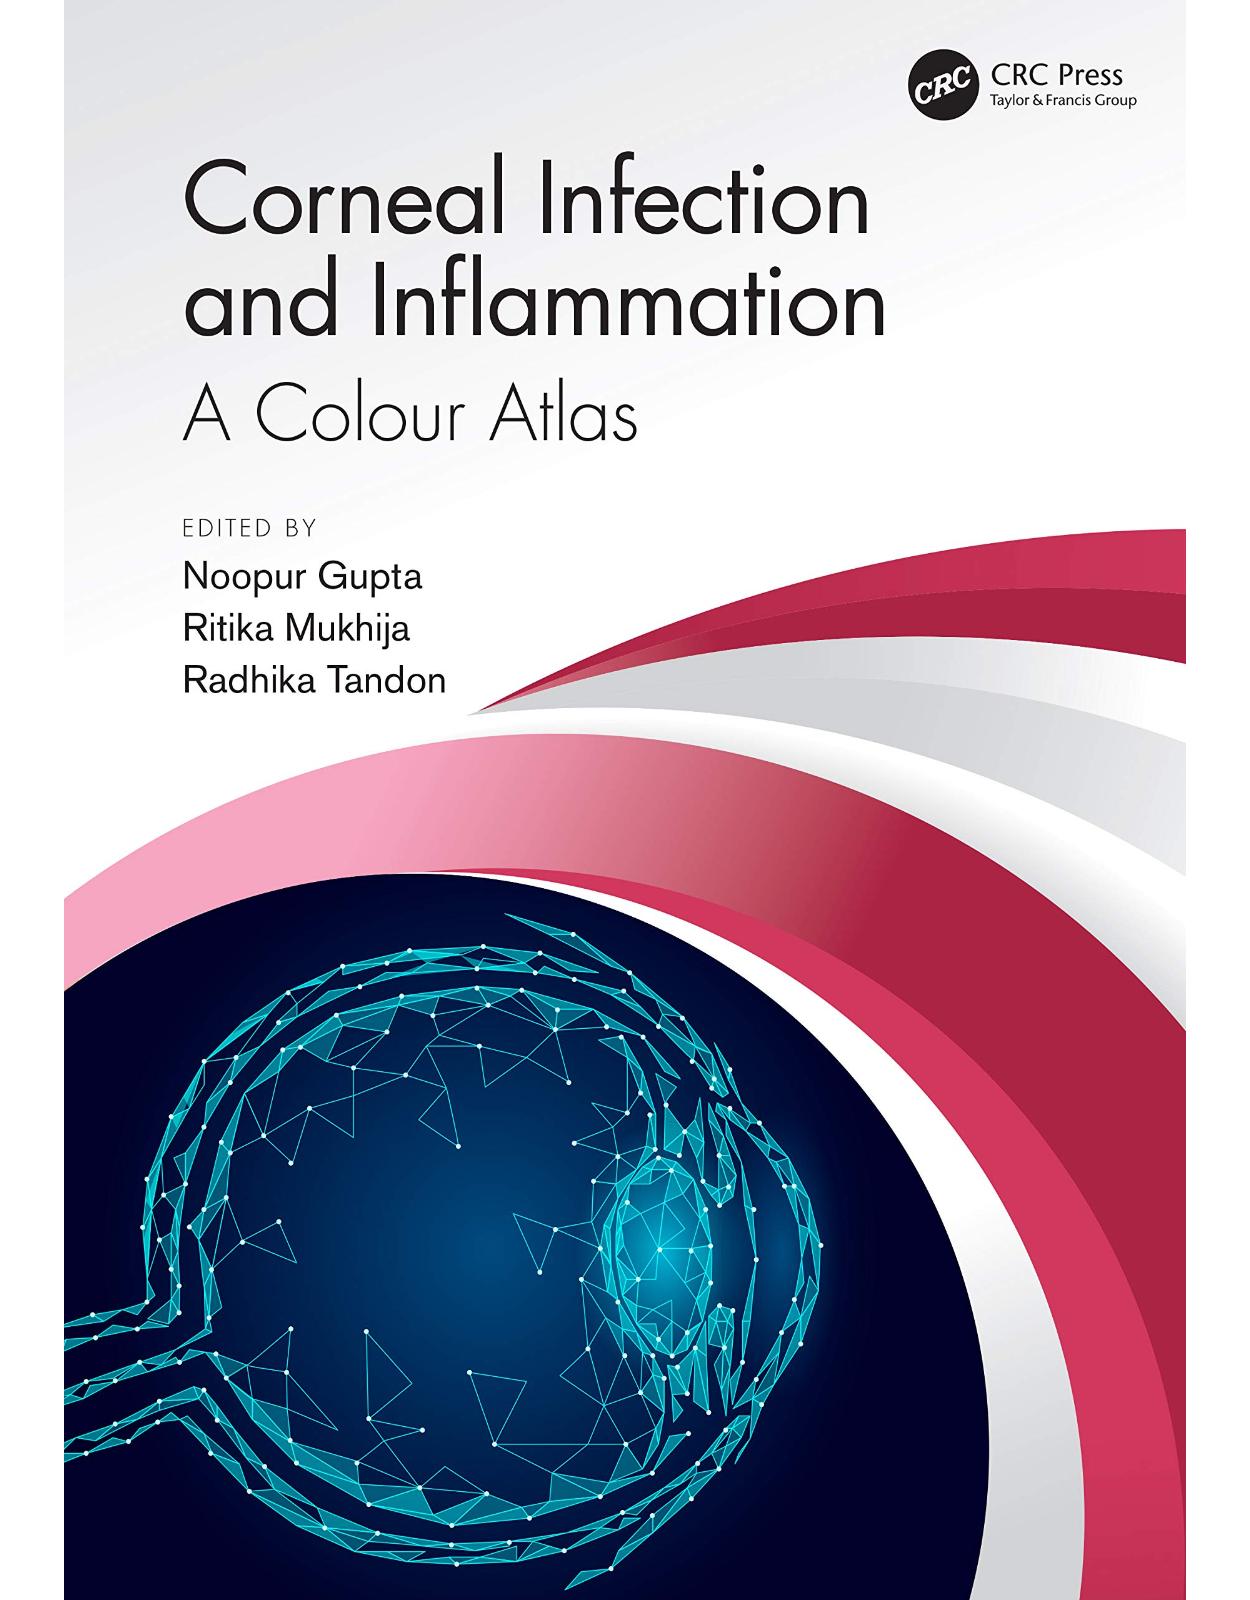 Corneal Infection and Inflammation